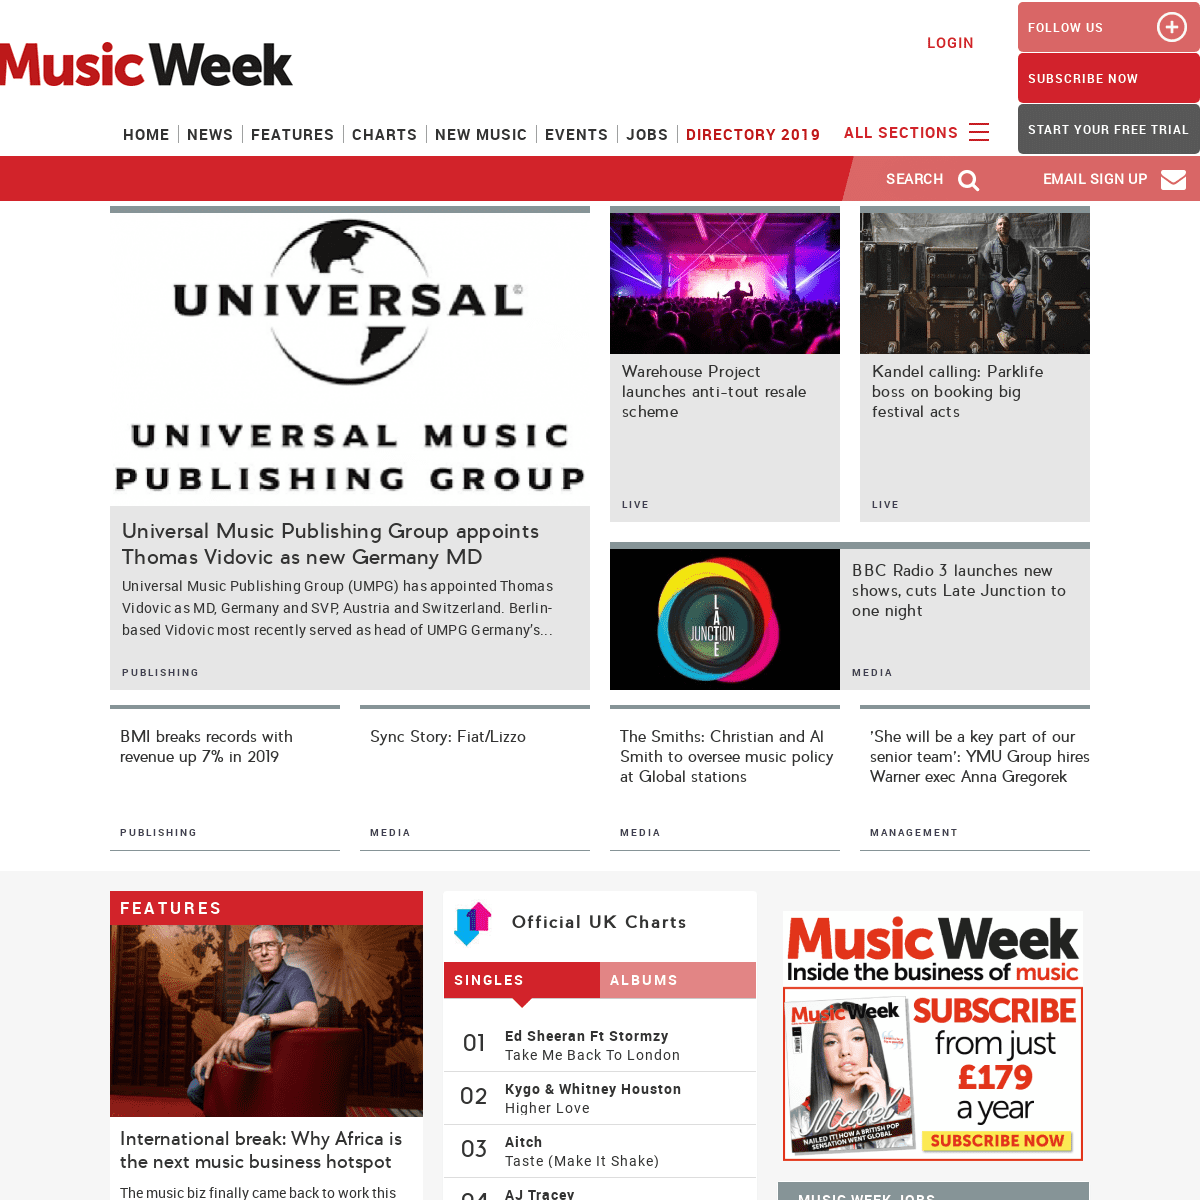 Latest News, Analysis, Opinions and Charts from the Music Industry | Music Week